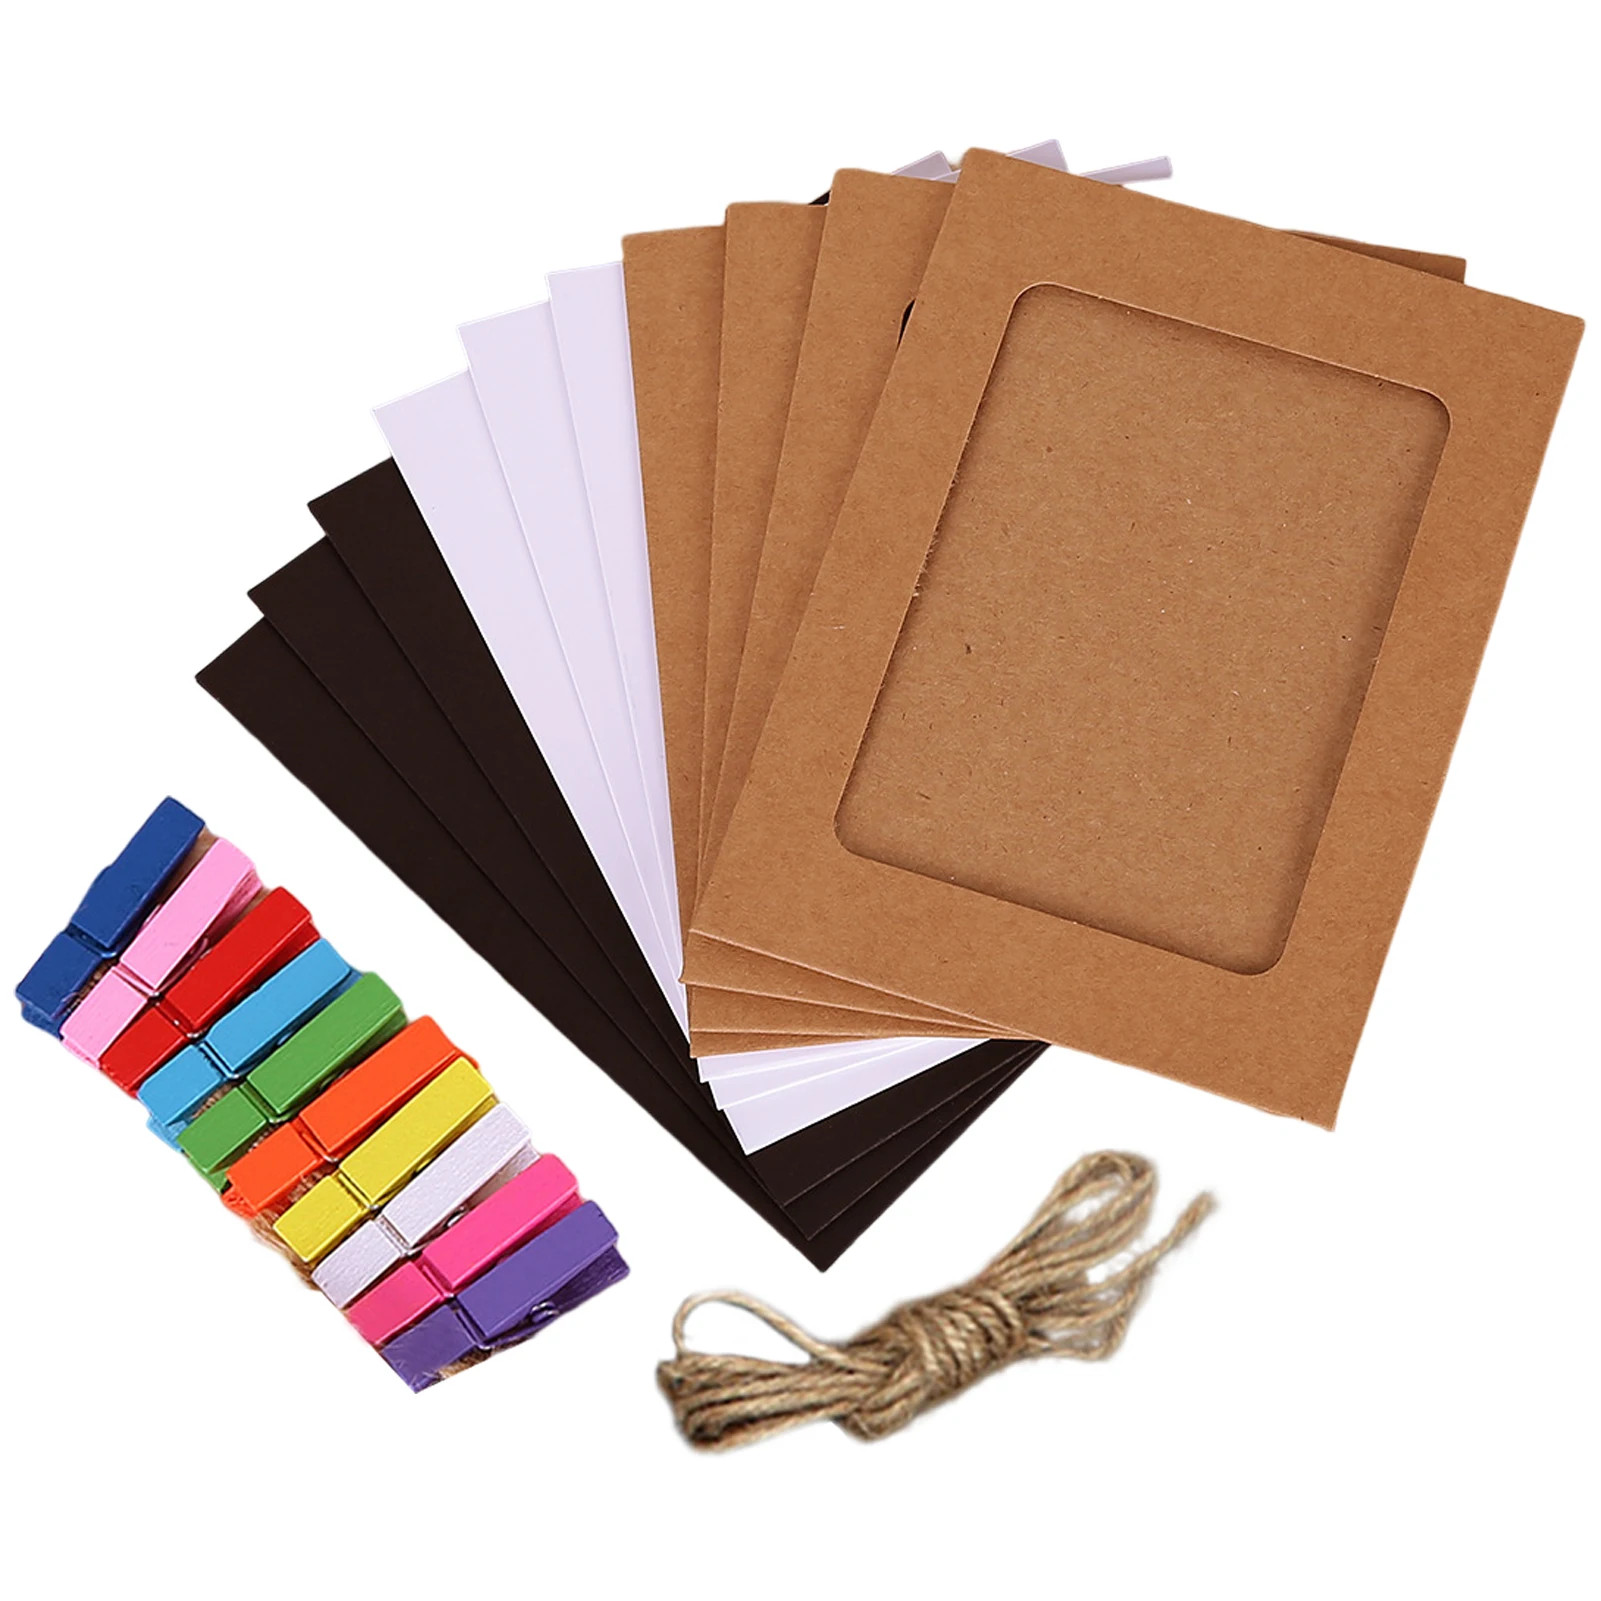 

10pcs Paper Wall Hanging Home Office DIY Jute Twine White Cardboard Smooth With Wooden Clips Wedding Exquisite Photo Frames